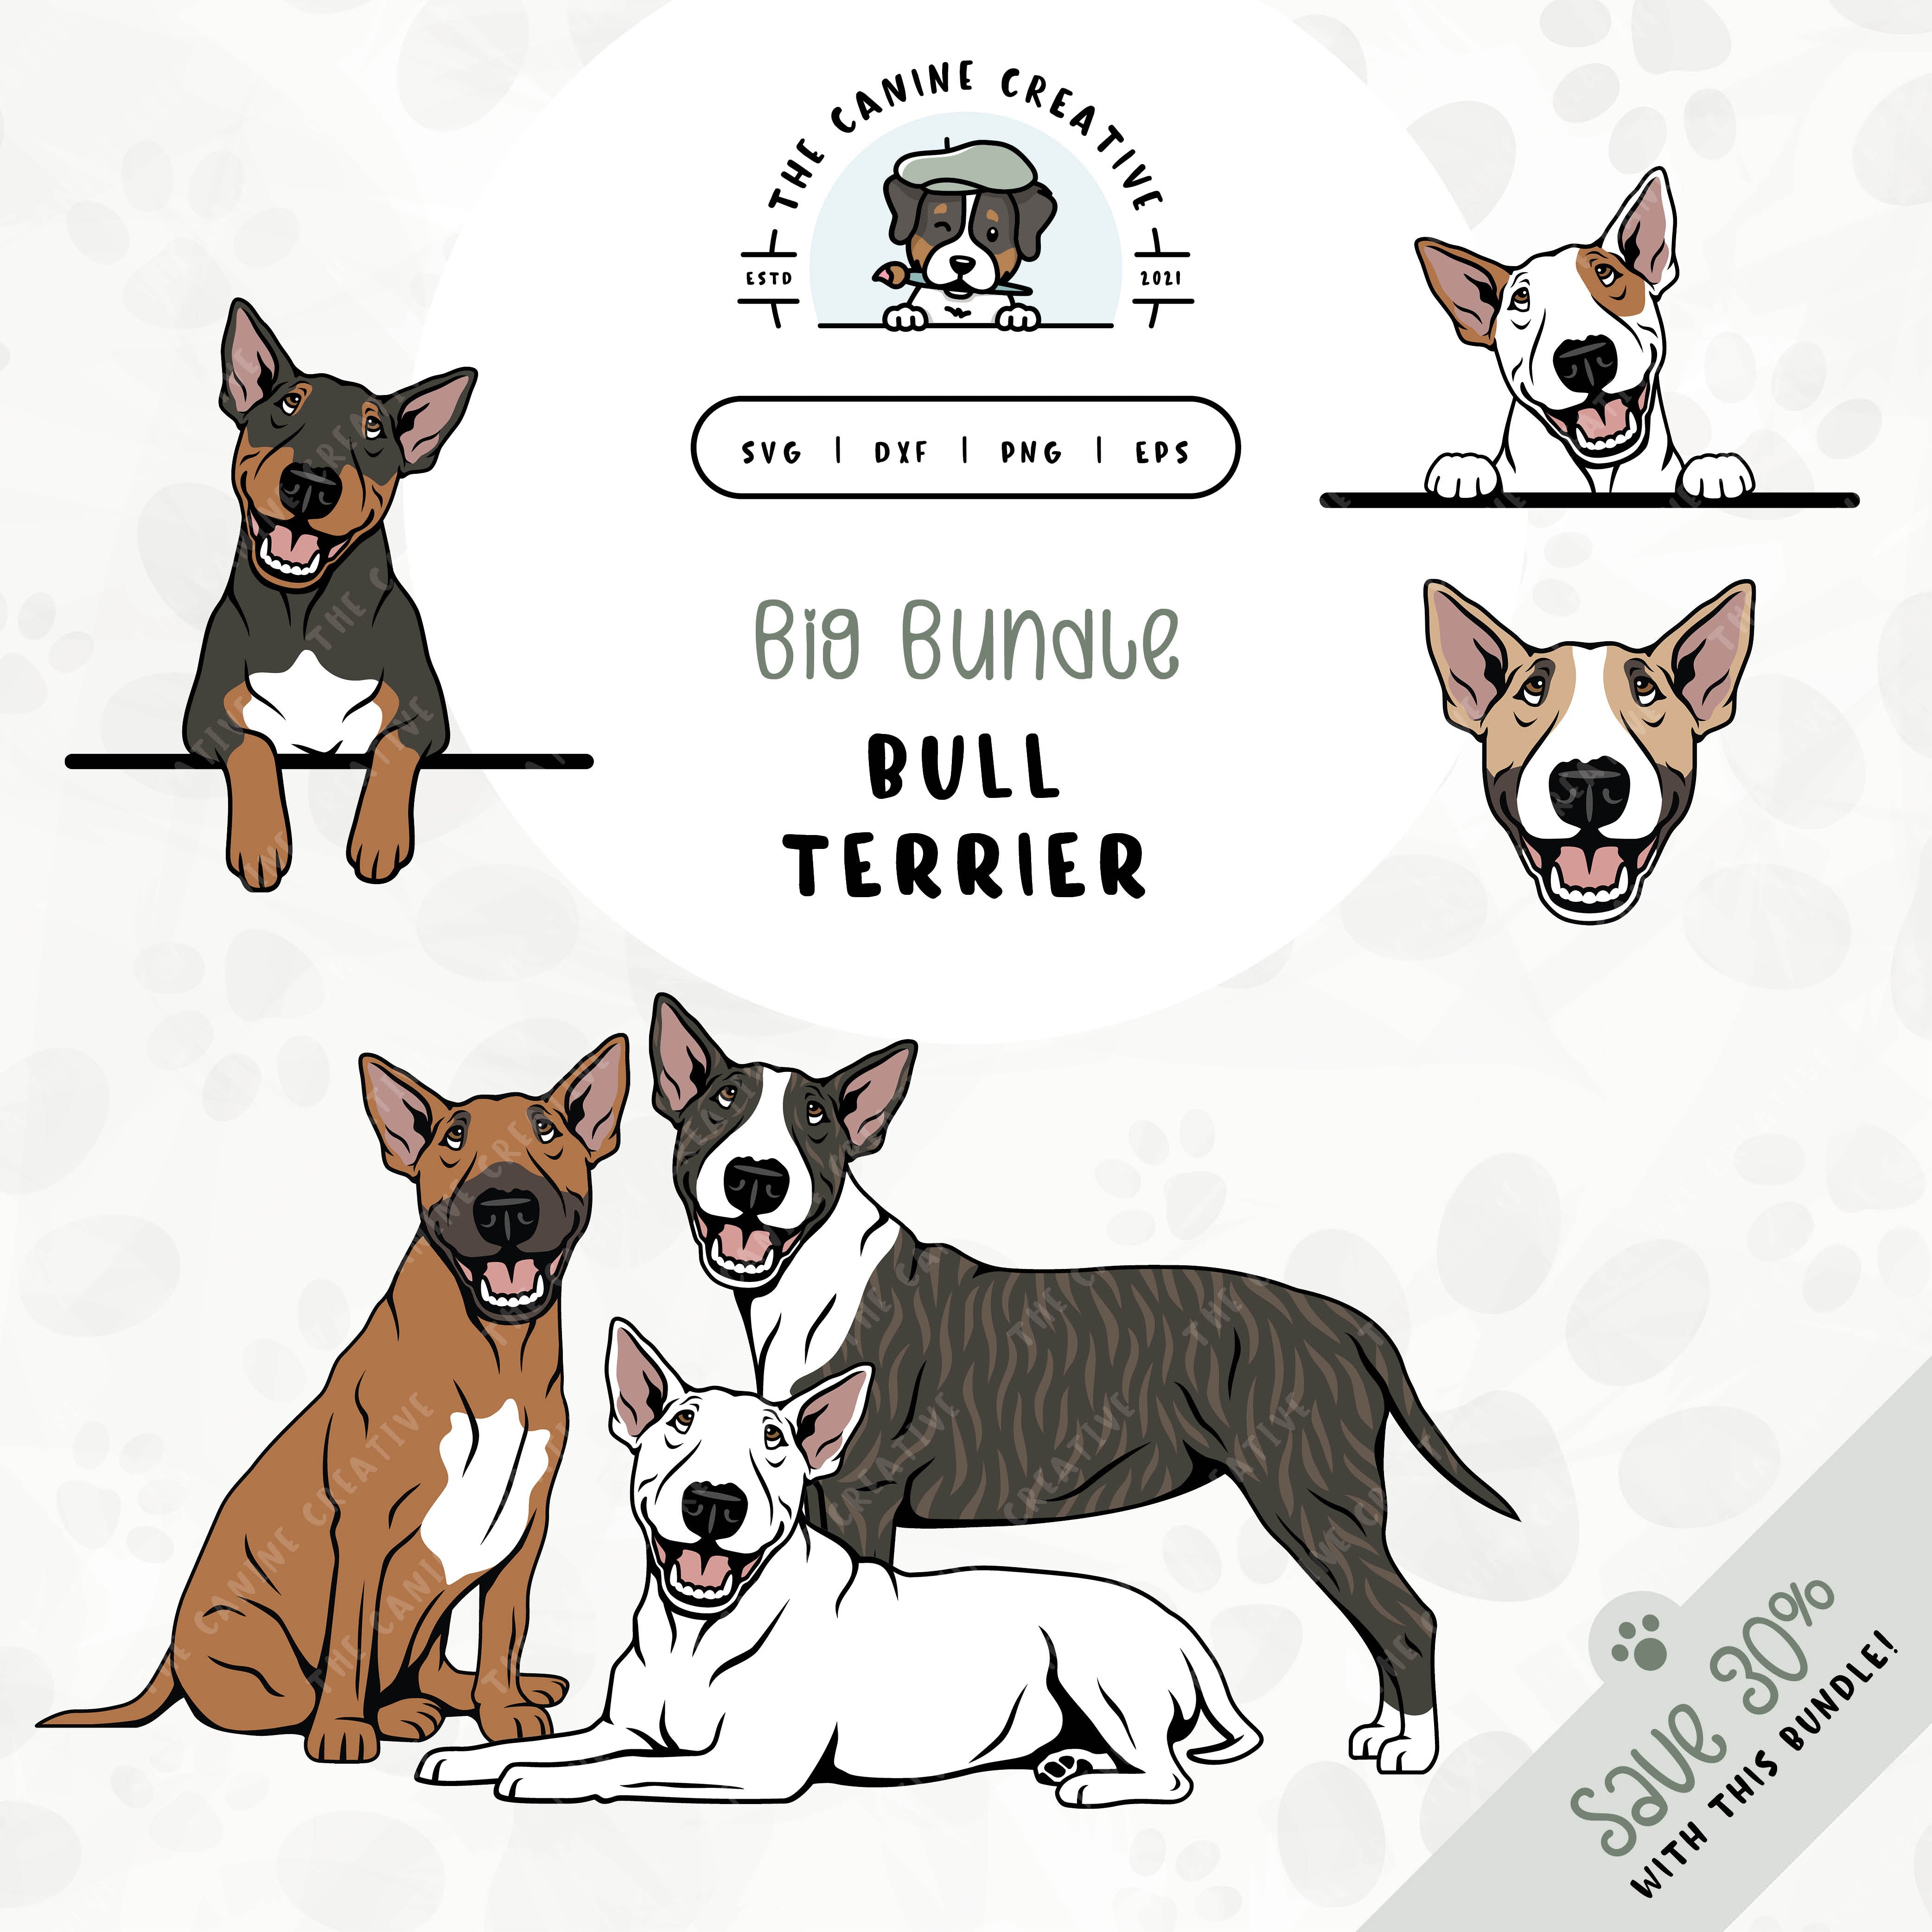 This 6-pack, Bull Terrier design bundle includes dog faces and five different poses: sitting, standing, laying down, and peeking (2 options). File formats include: SVG, DXF, PNG, and EPS.